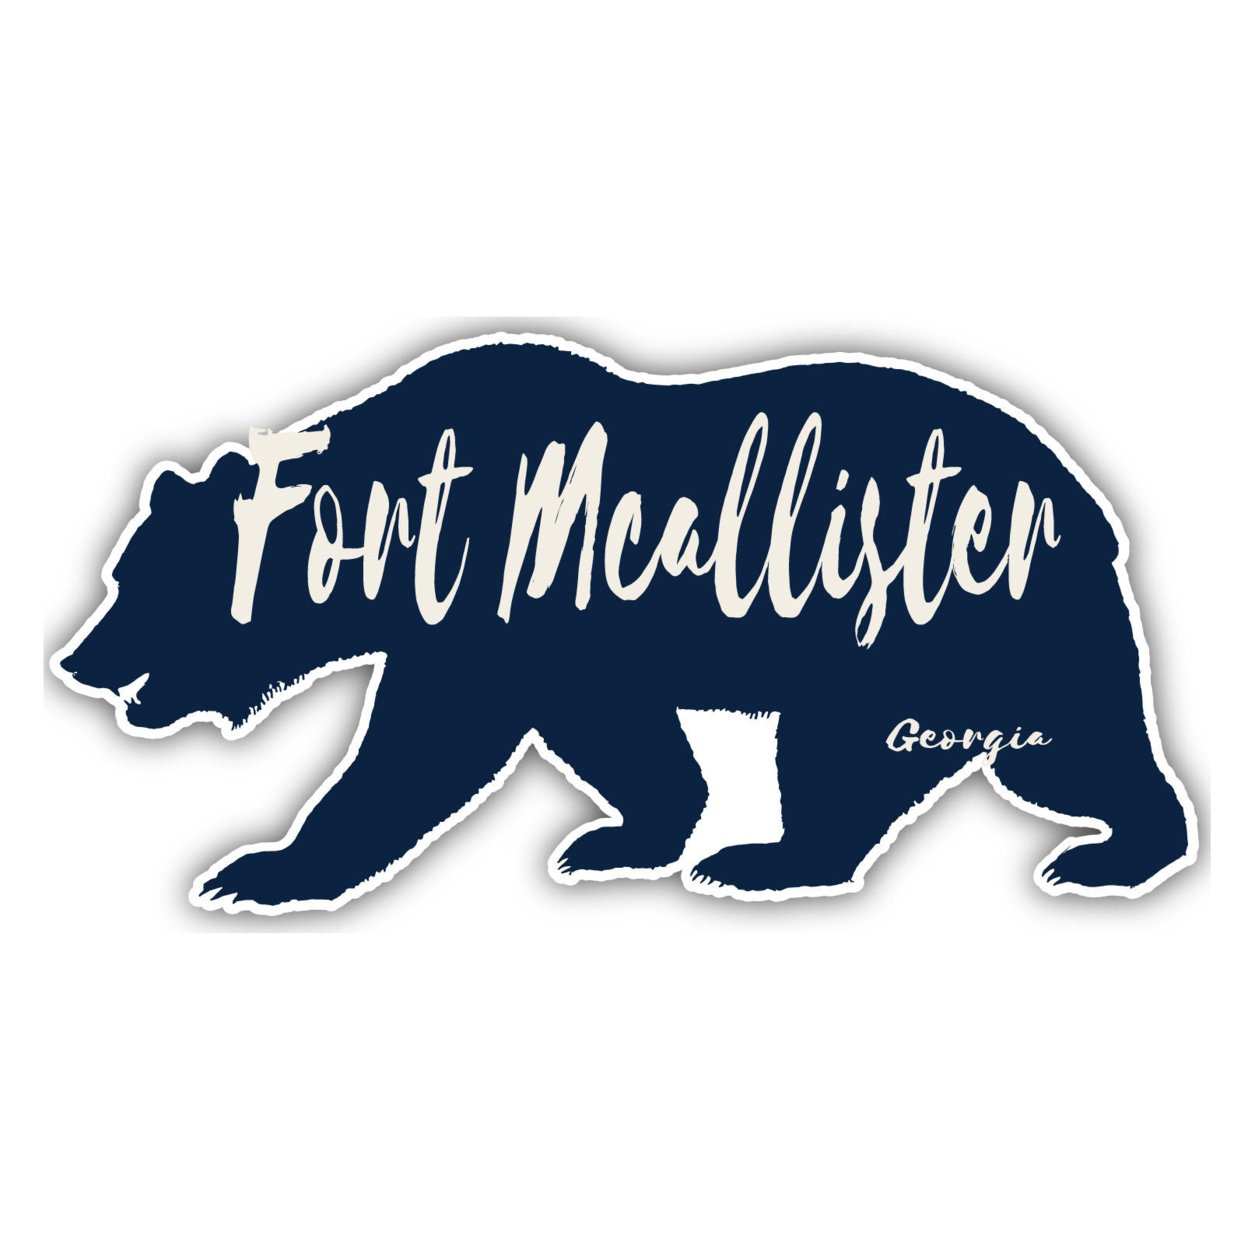 Fort McAllister Georgia Souvenir Decorative Stickers (Choose Theme And Size) - Single Unit, 2-Inch, Great Outdoors